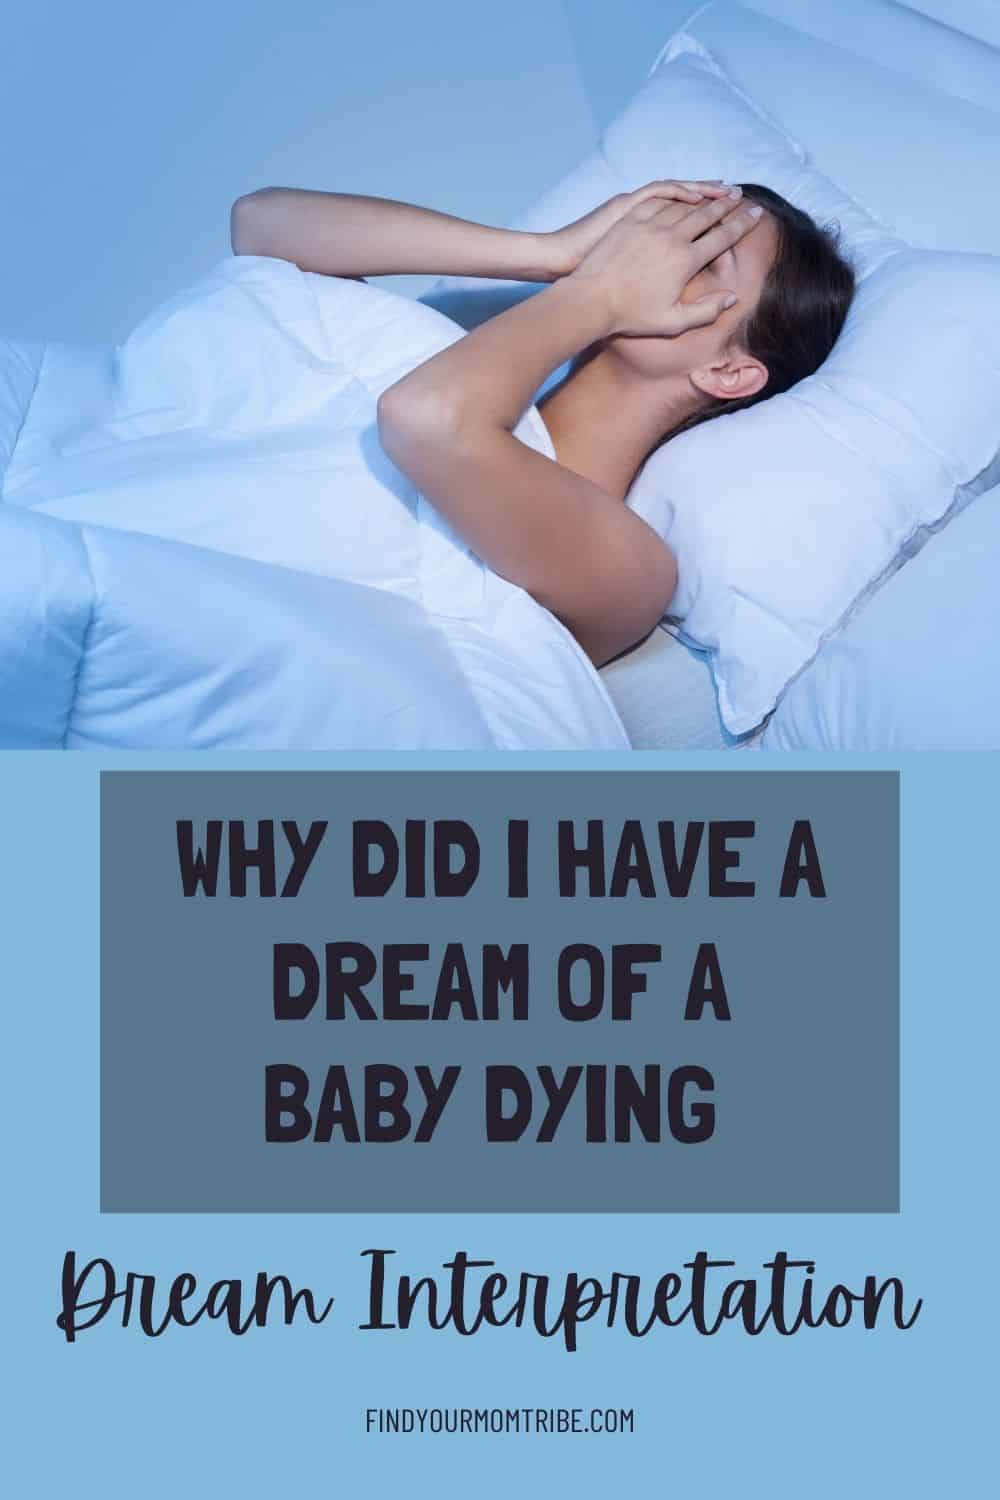 Pinterest dream of a baby dying 